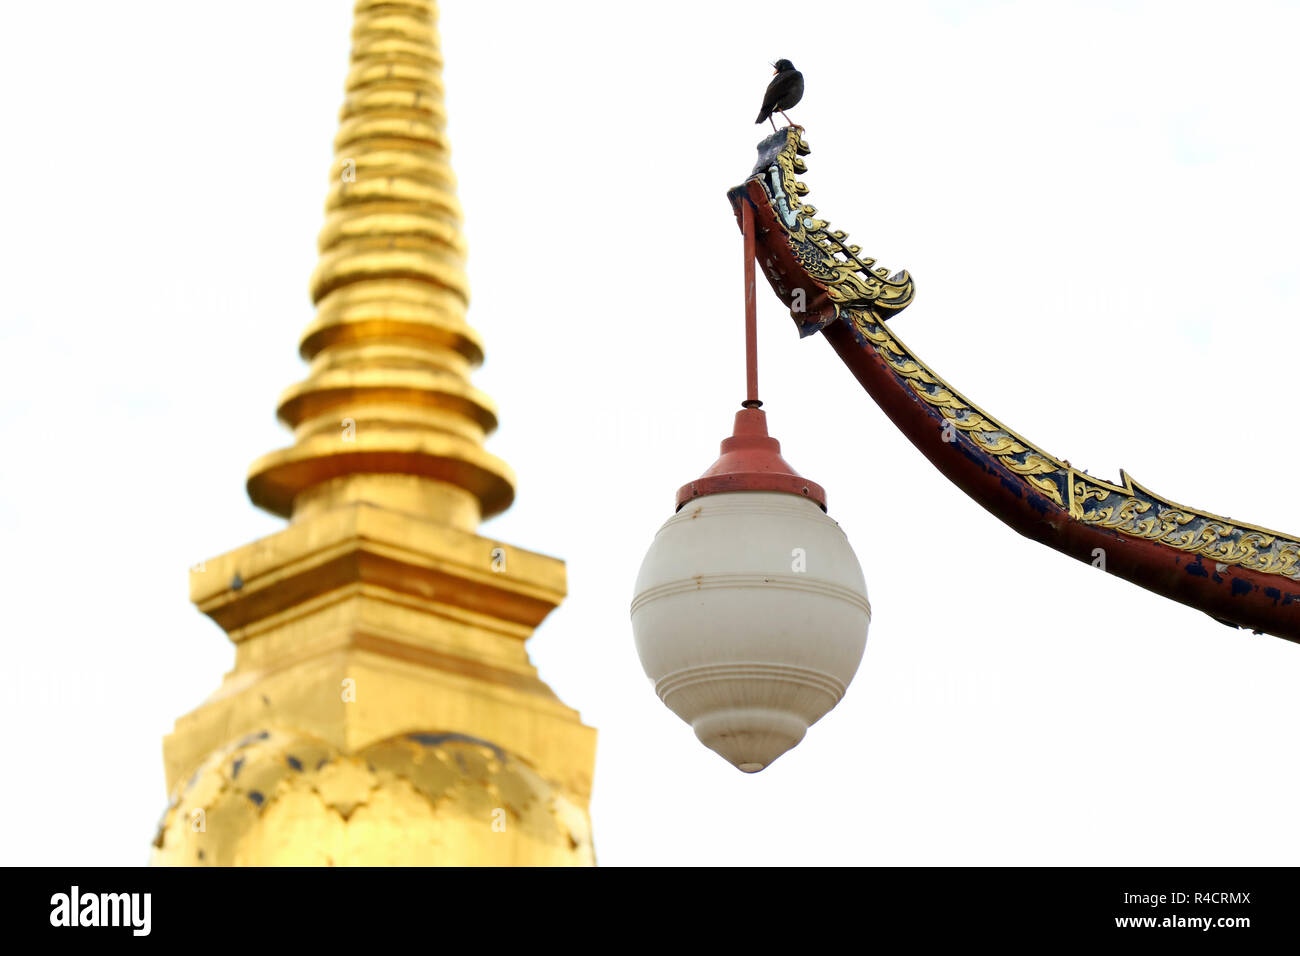 Thai Vintage Boat Shaped Street Lamp with a Black Bird Perching on the Top and Golden Chedi in Background, Historic Place in Nan Province, Thailand Stock Photo